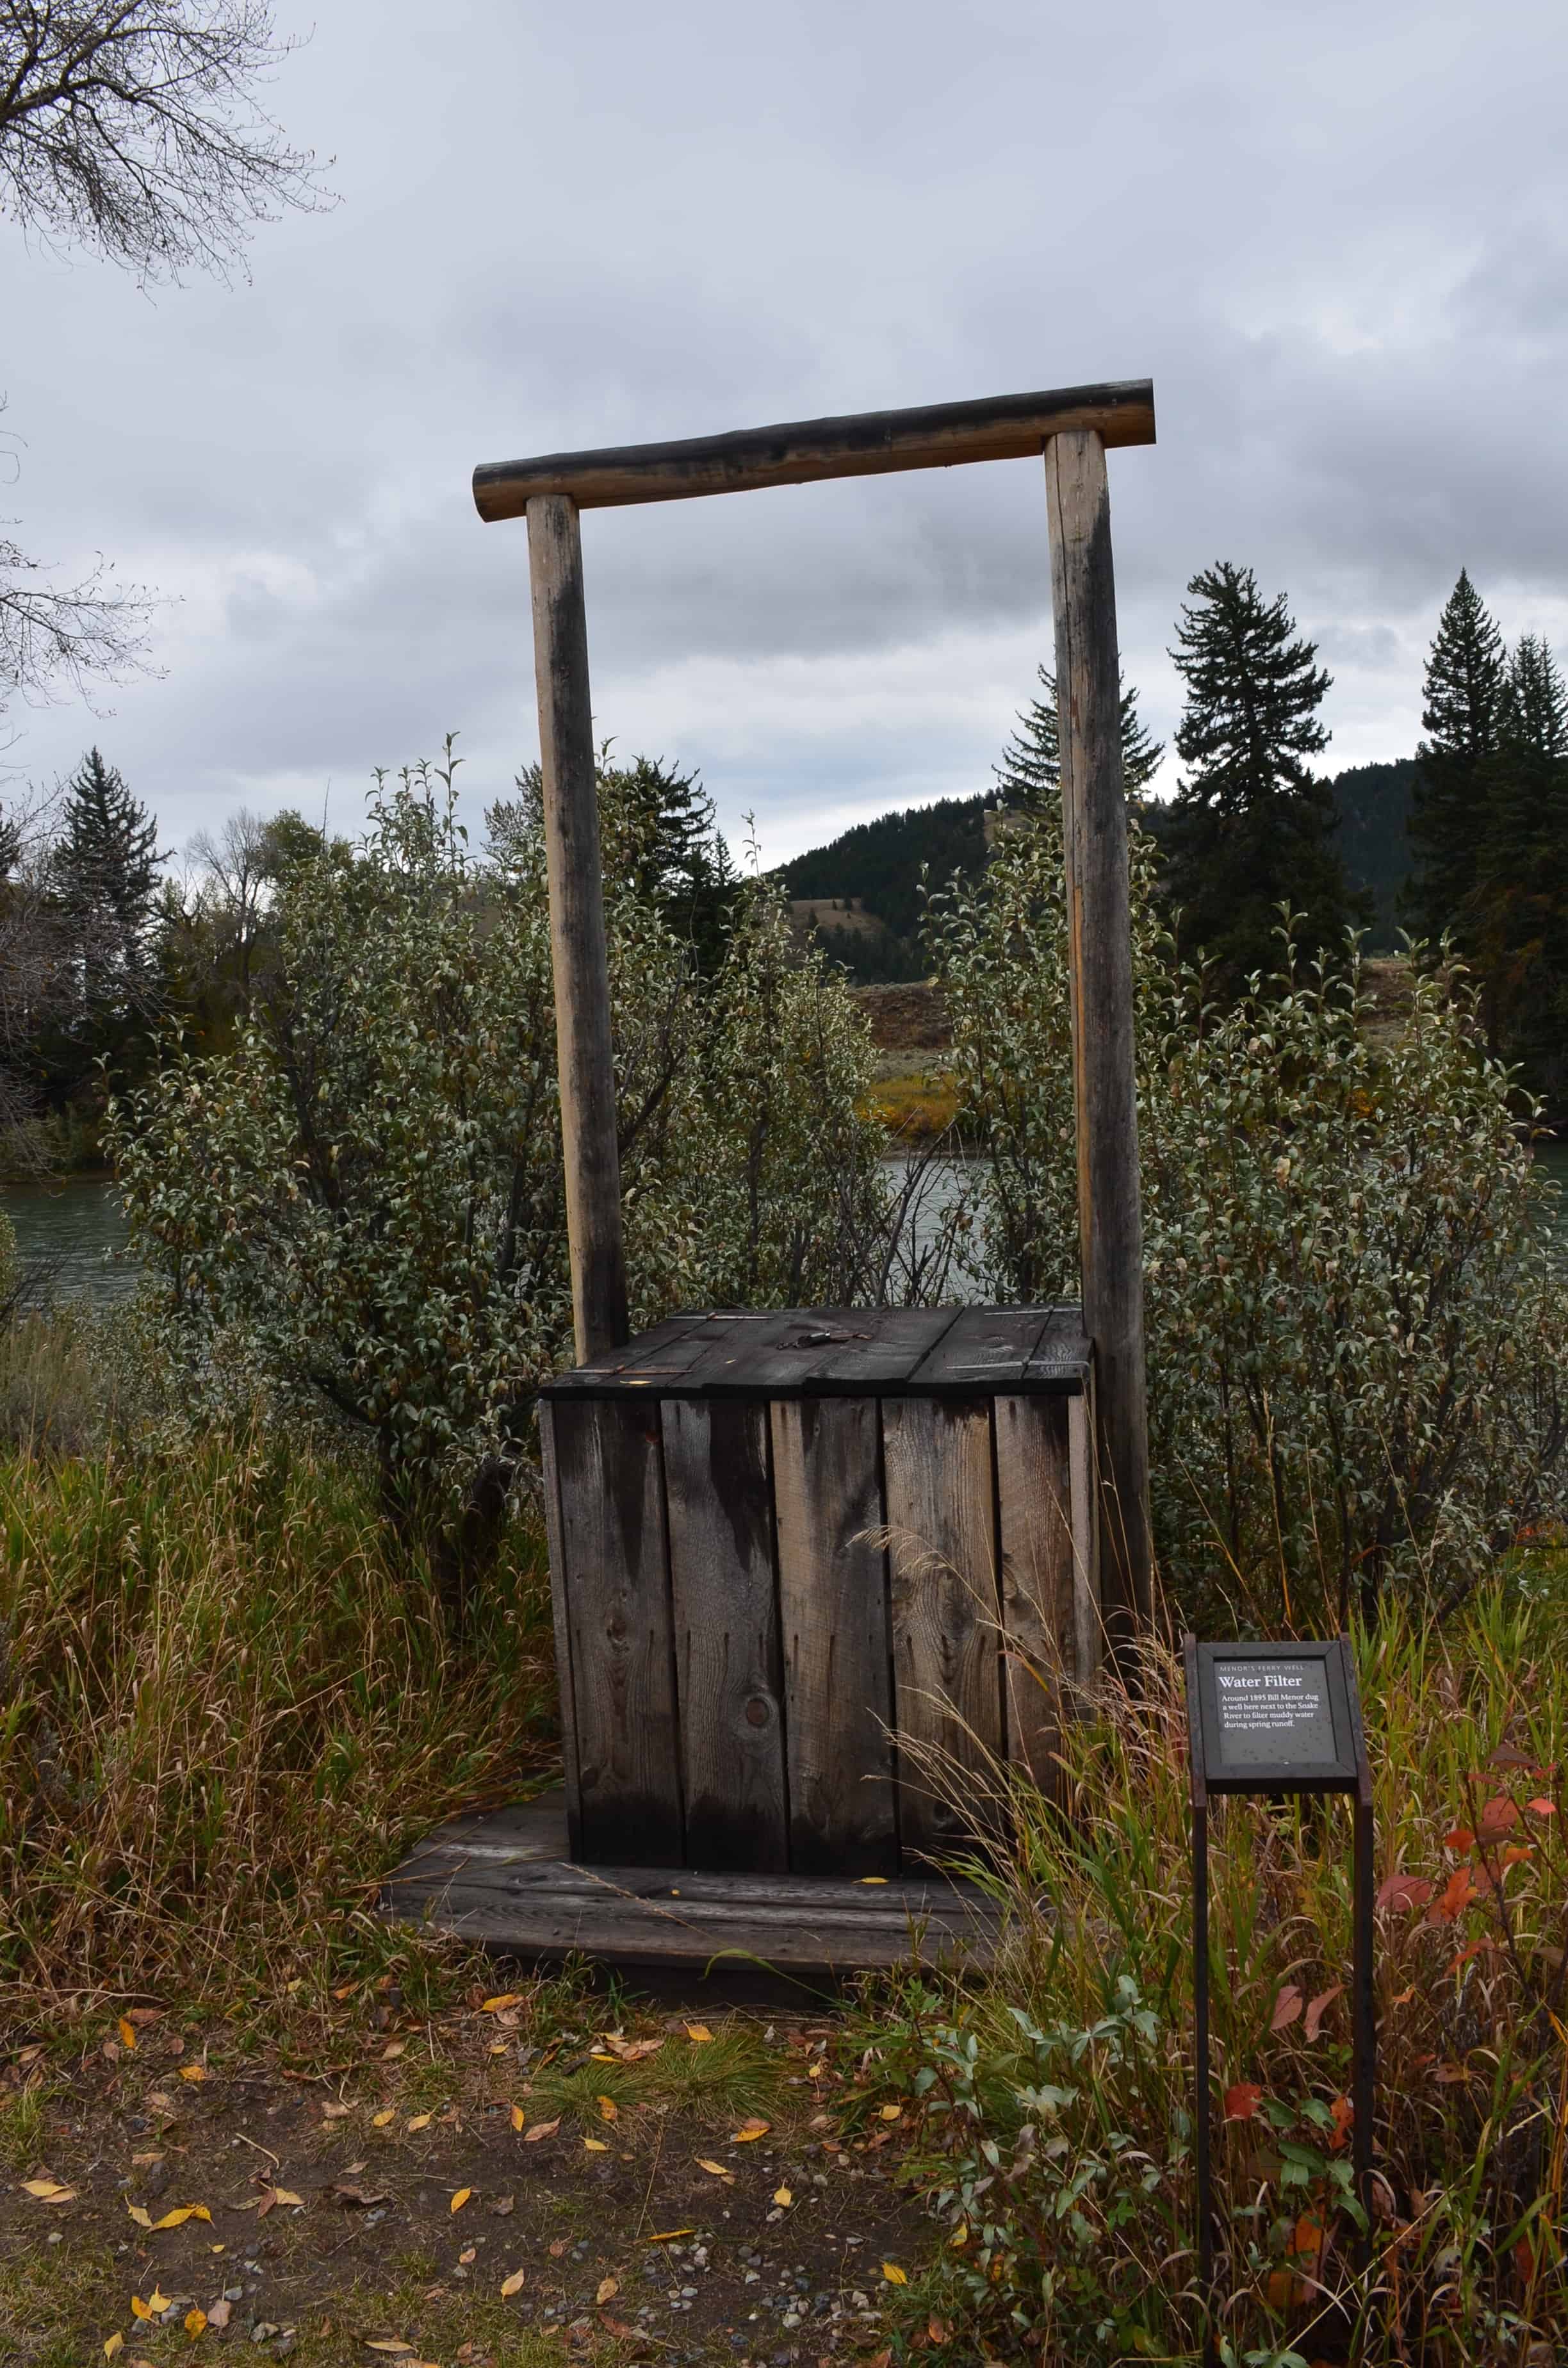 Water filter at Menor's Ferry Historic District in Grand Teton National Park, Wyoming